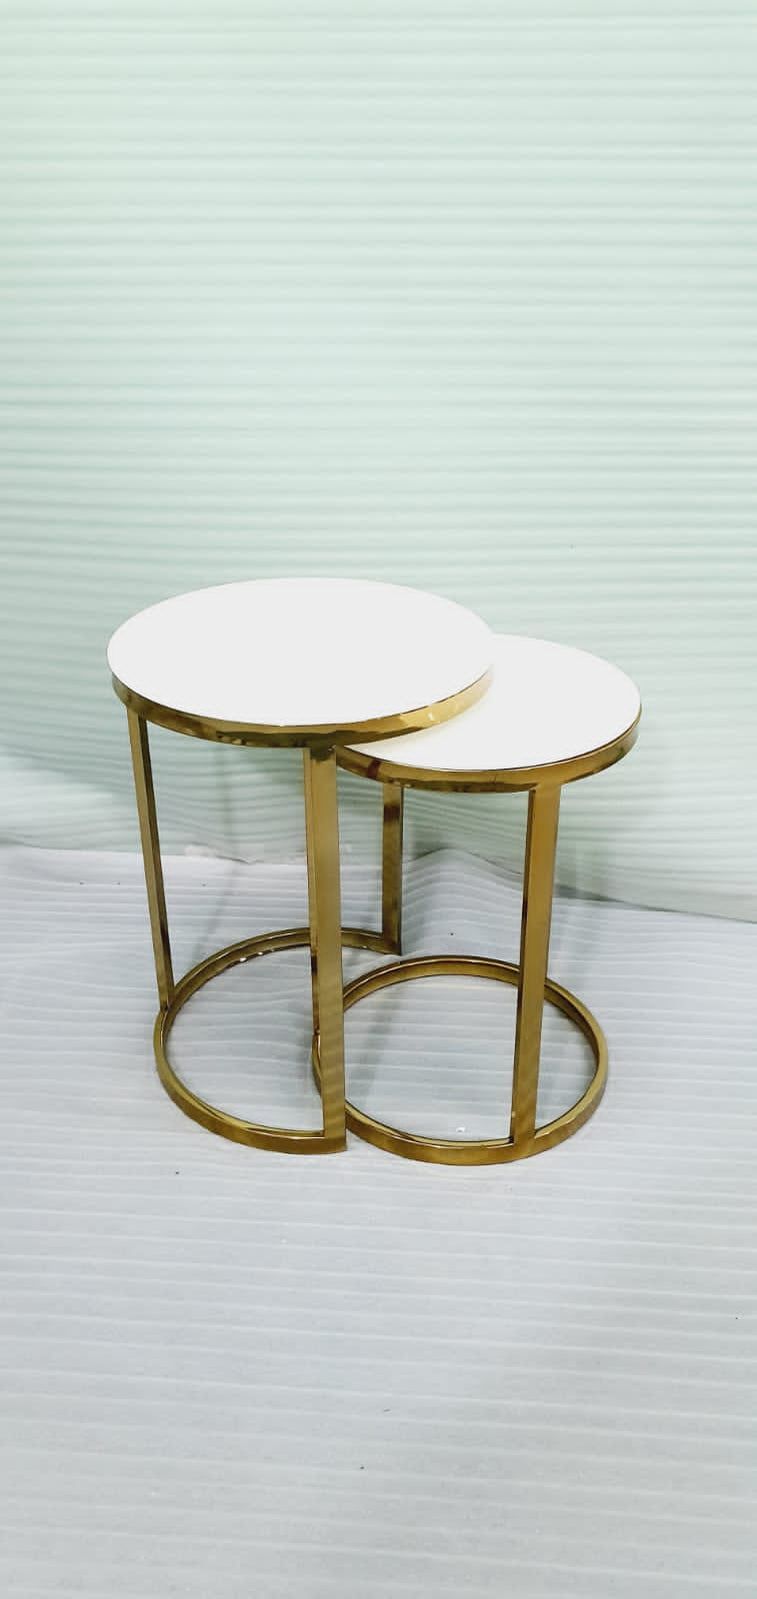 Stainless steel nesting Table